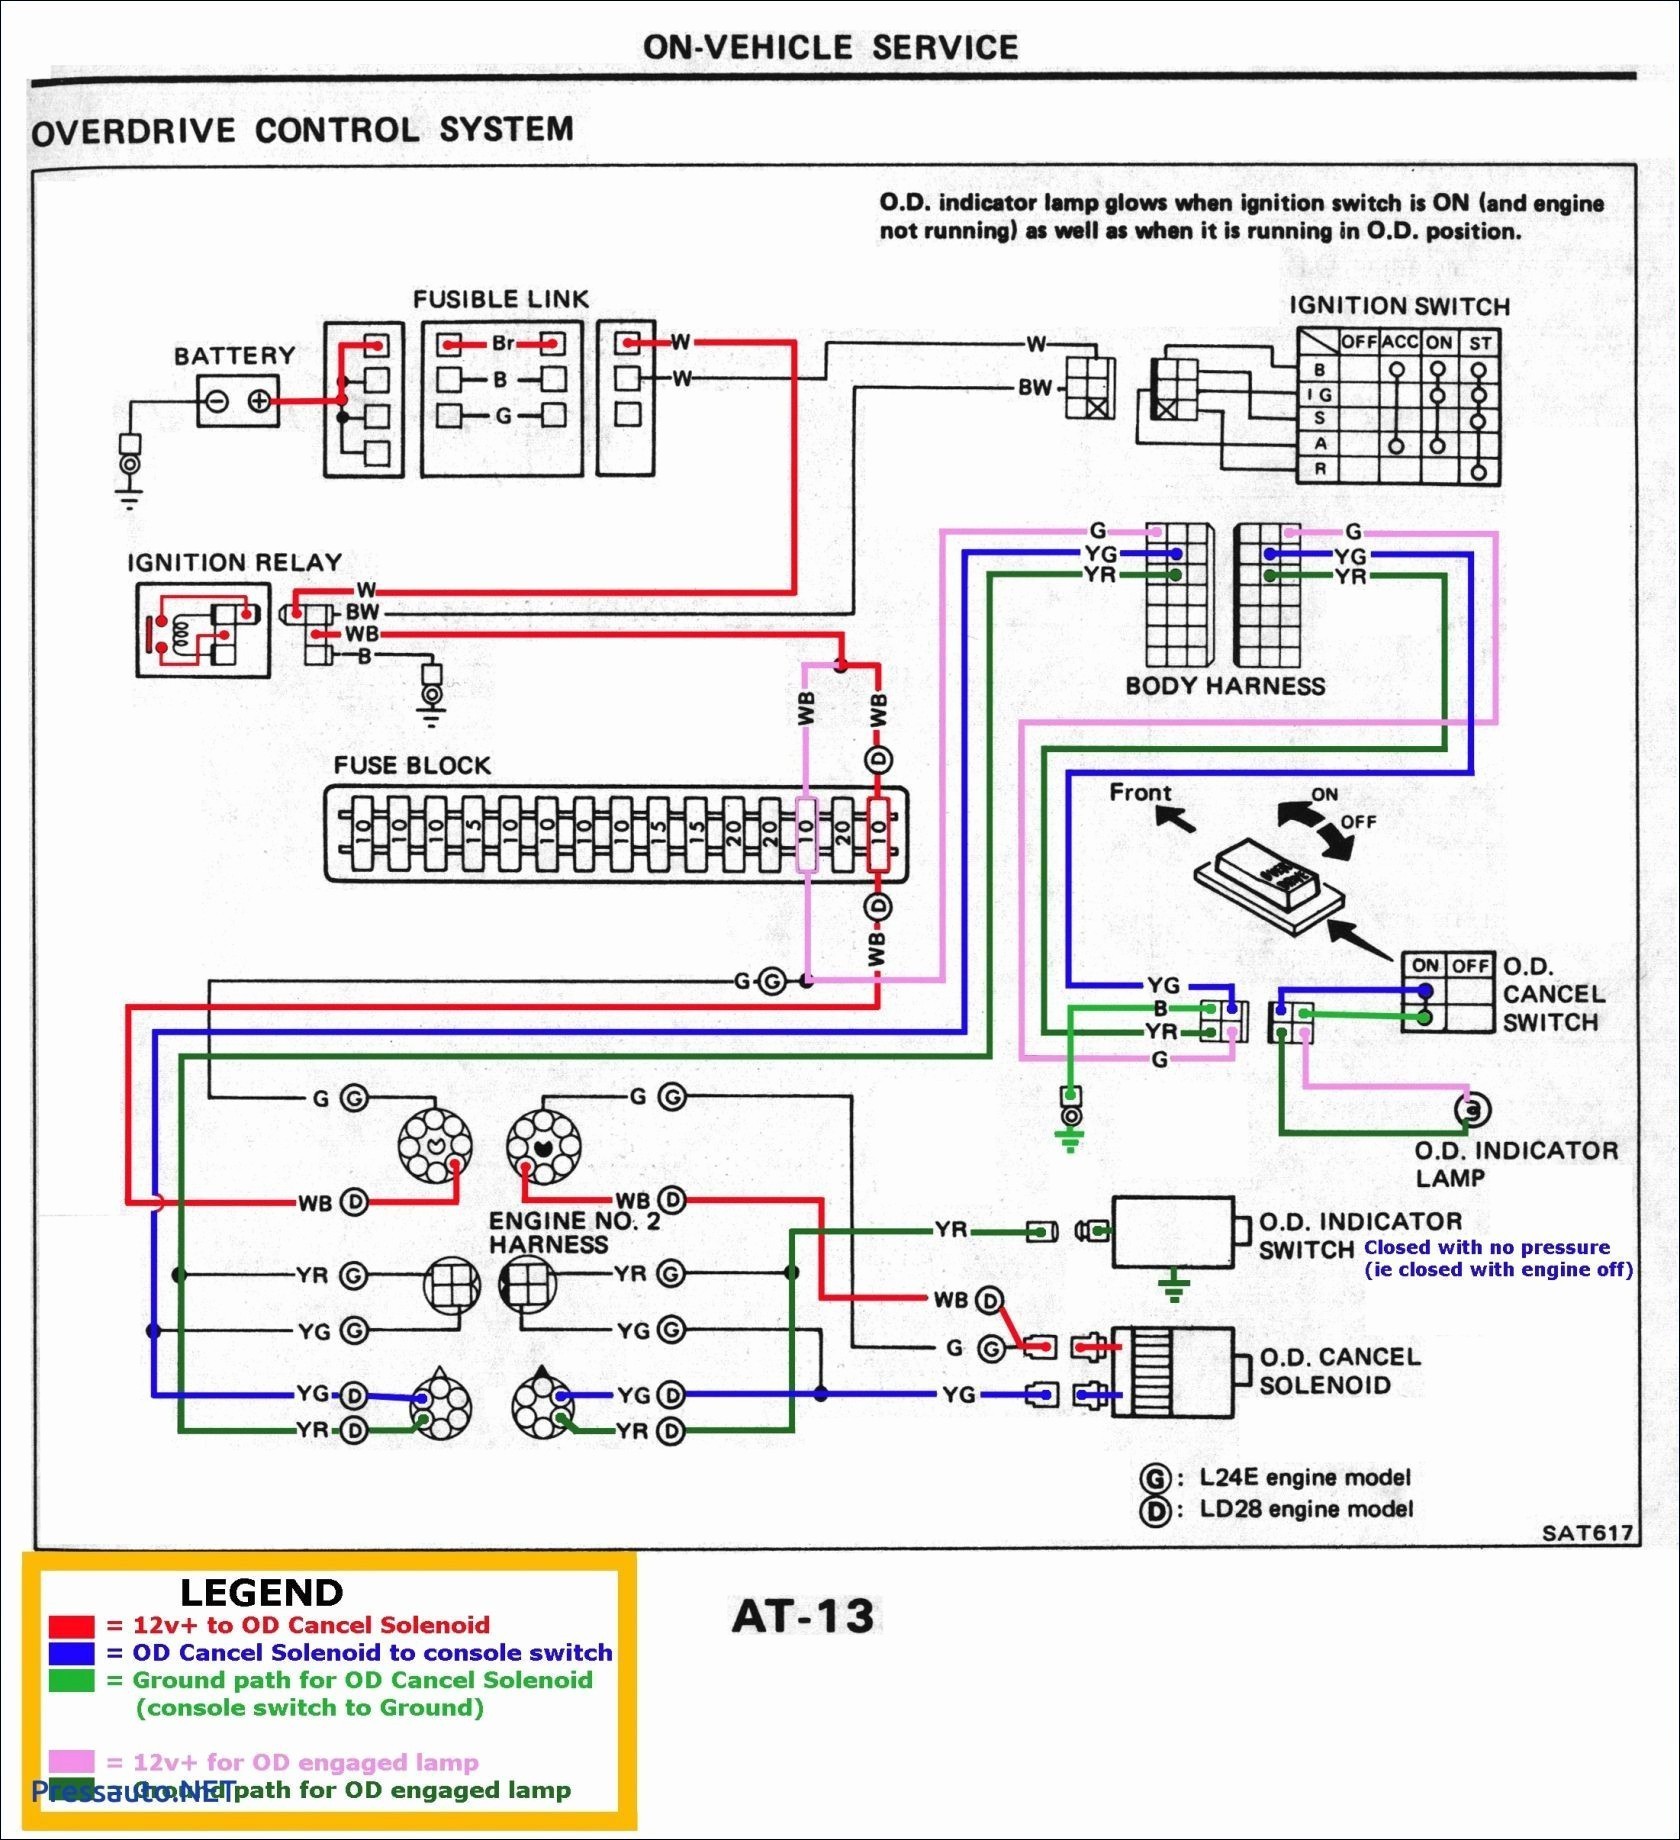 Wiring Diagram For Dual Batteries Reference Wiring Diagram For Dual Switch E Light Inspirationa Wiring Diagram